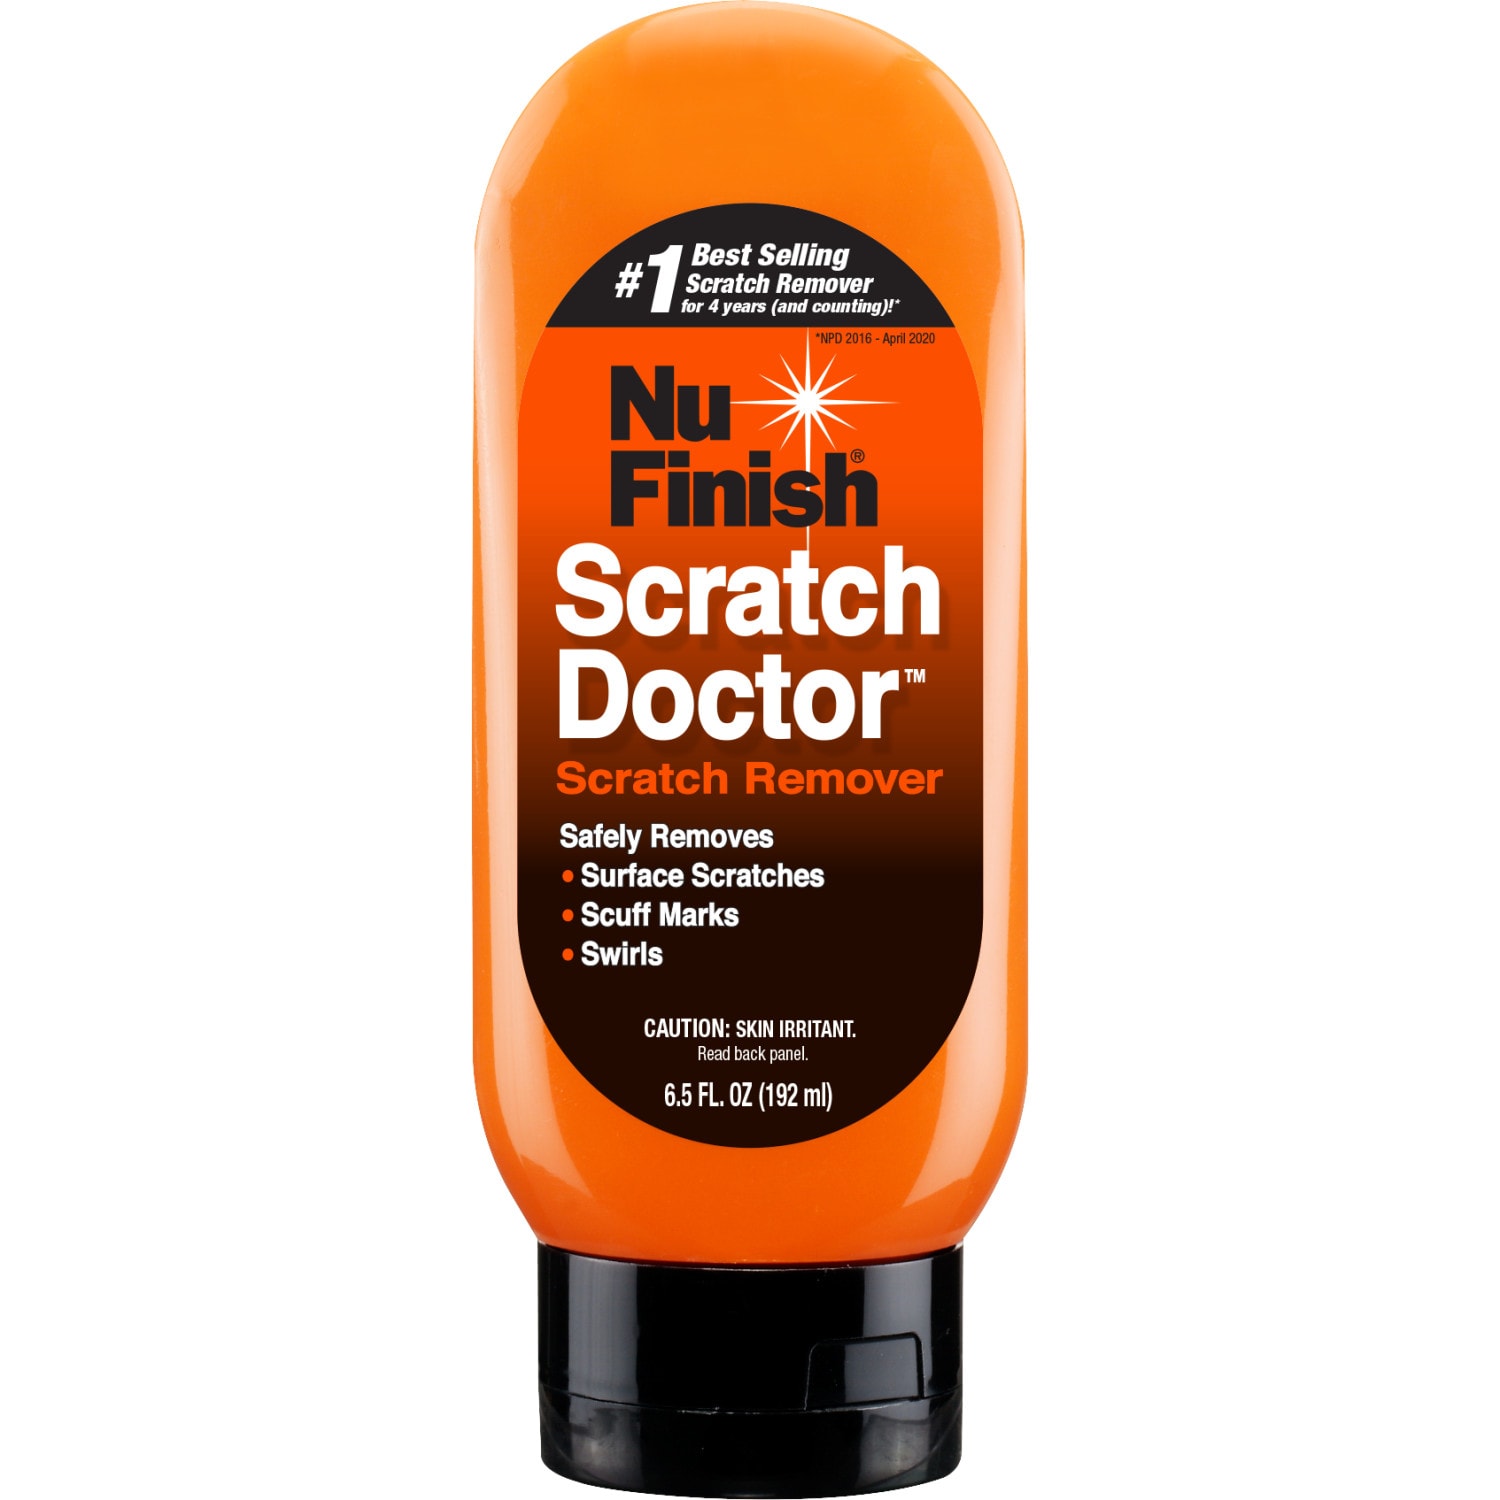 Nu Finish SA - Made an oopsie? Allow NuFinish Scratch Doctor to easily  repair surface scratches. Rated #1 surface scratch remover by independent  laboratory testing versus other leading car scratch removers. Get